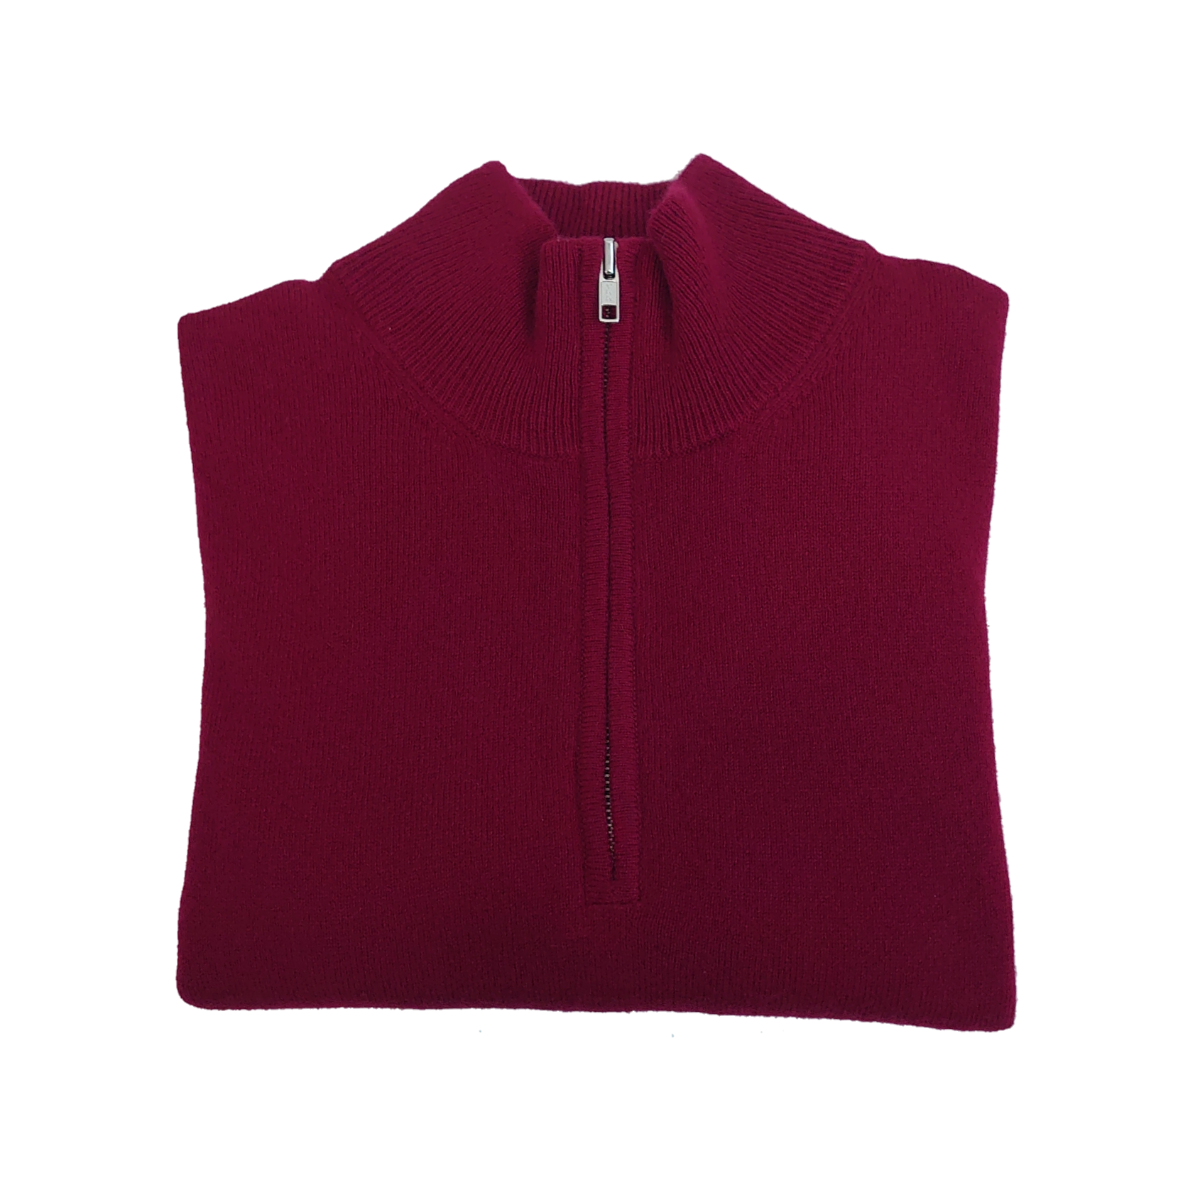 Men's Relaxed Fit Zip Neck 100% Pure Cashmere Jumper - Wine Red - XS